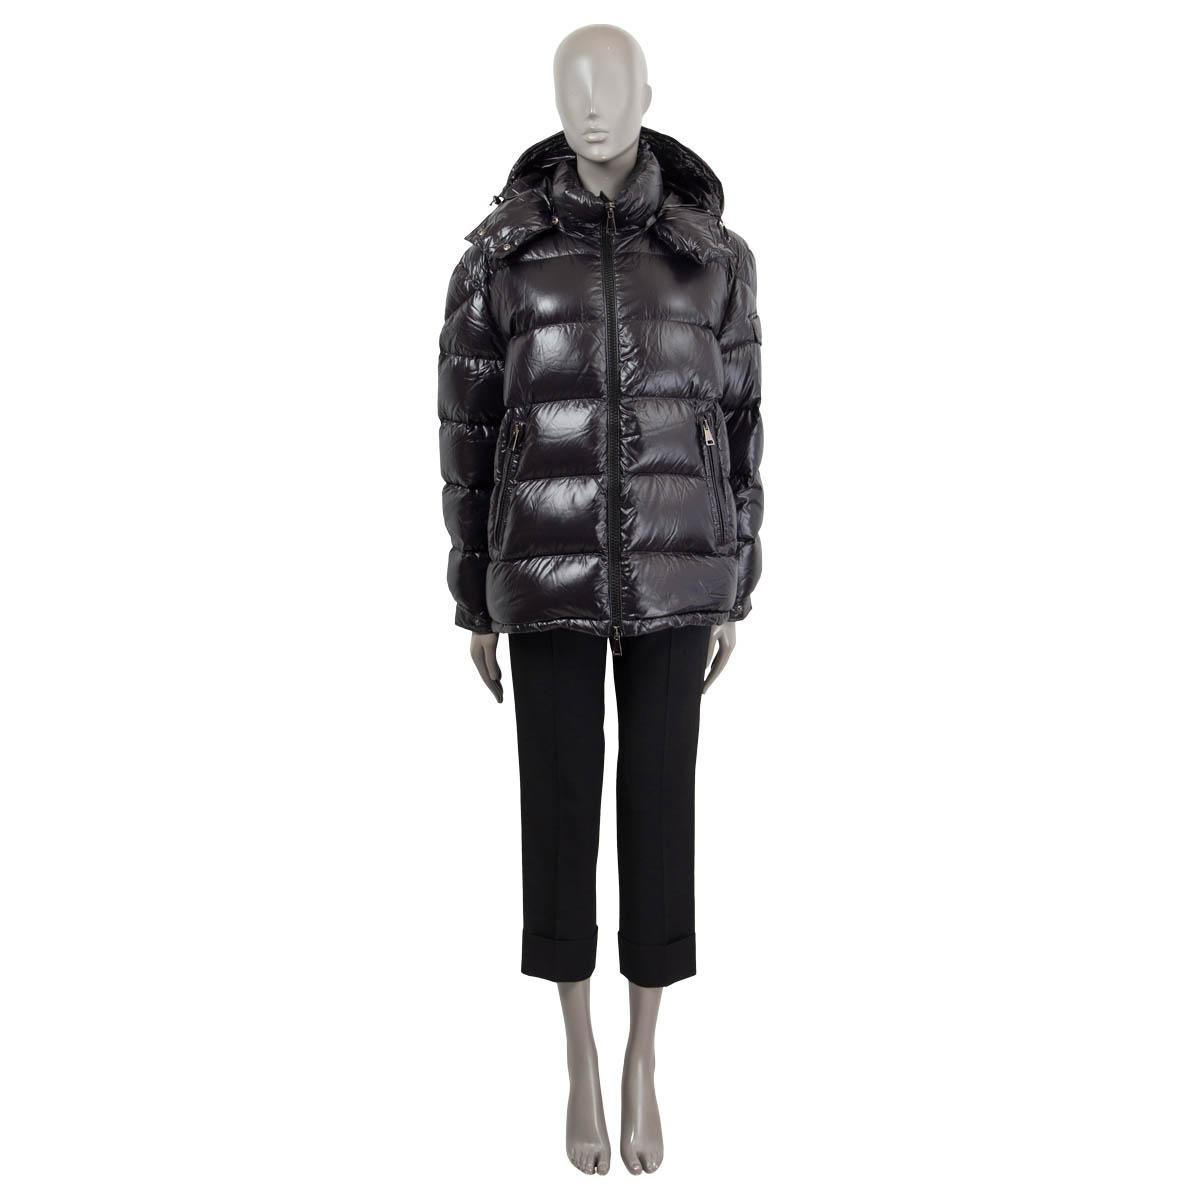 100% authentic Moncler 'Maire' quilted puffer jacket in black shiny nylon (100%). Features a stand collar, drawstring hood, flap pocket on the arm and two zip pockets on the front. Opens with a zipper on the front. Down filling. Has been worn and is